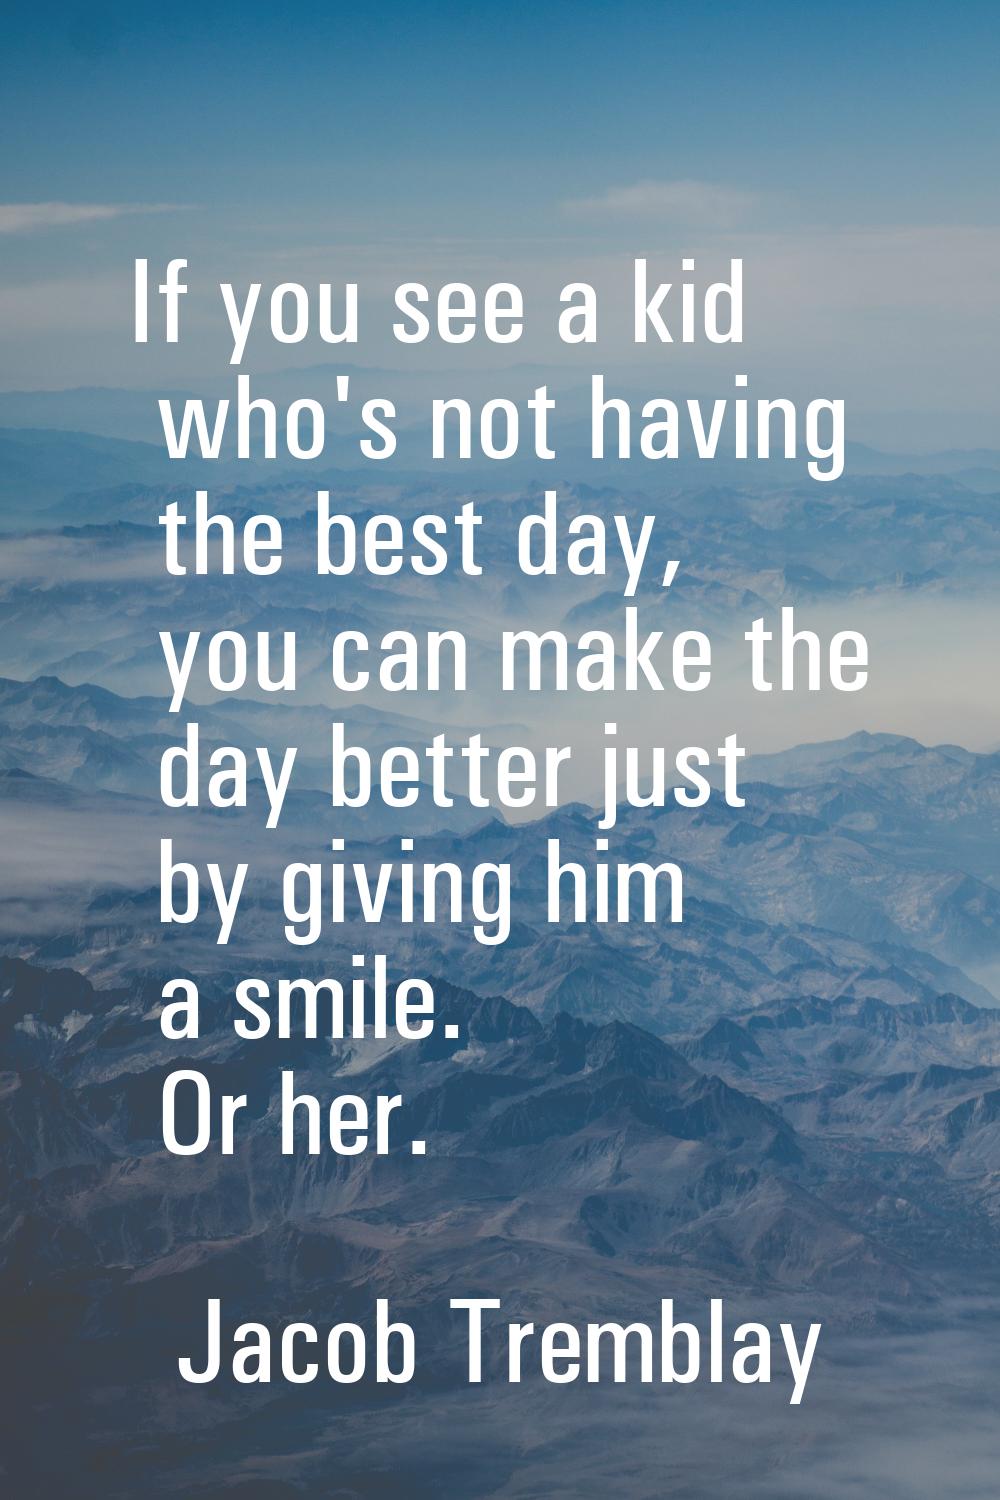 If you see a kid who's not having the best day, you can make the day better just by giving him a sm